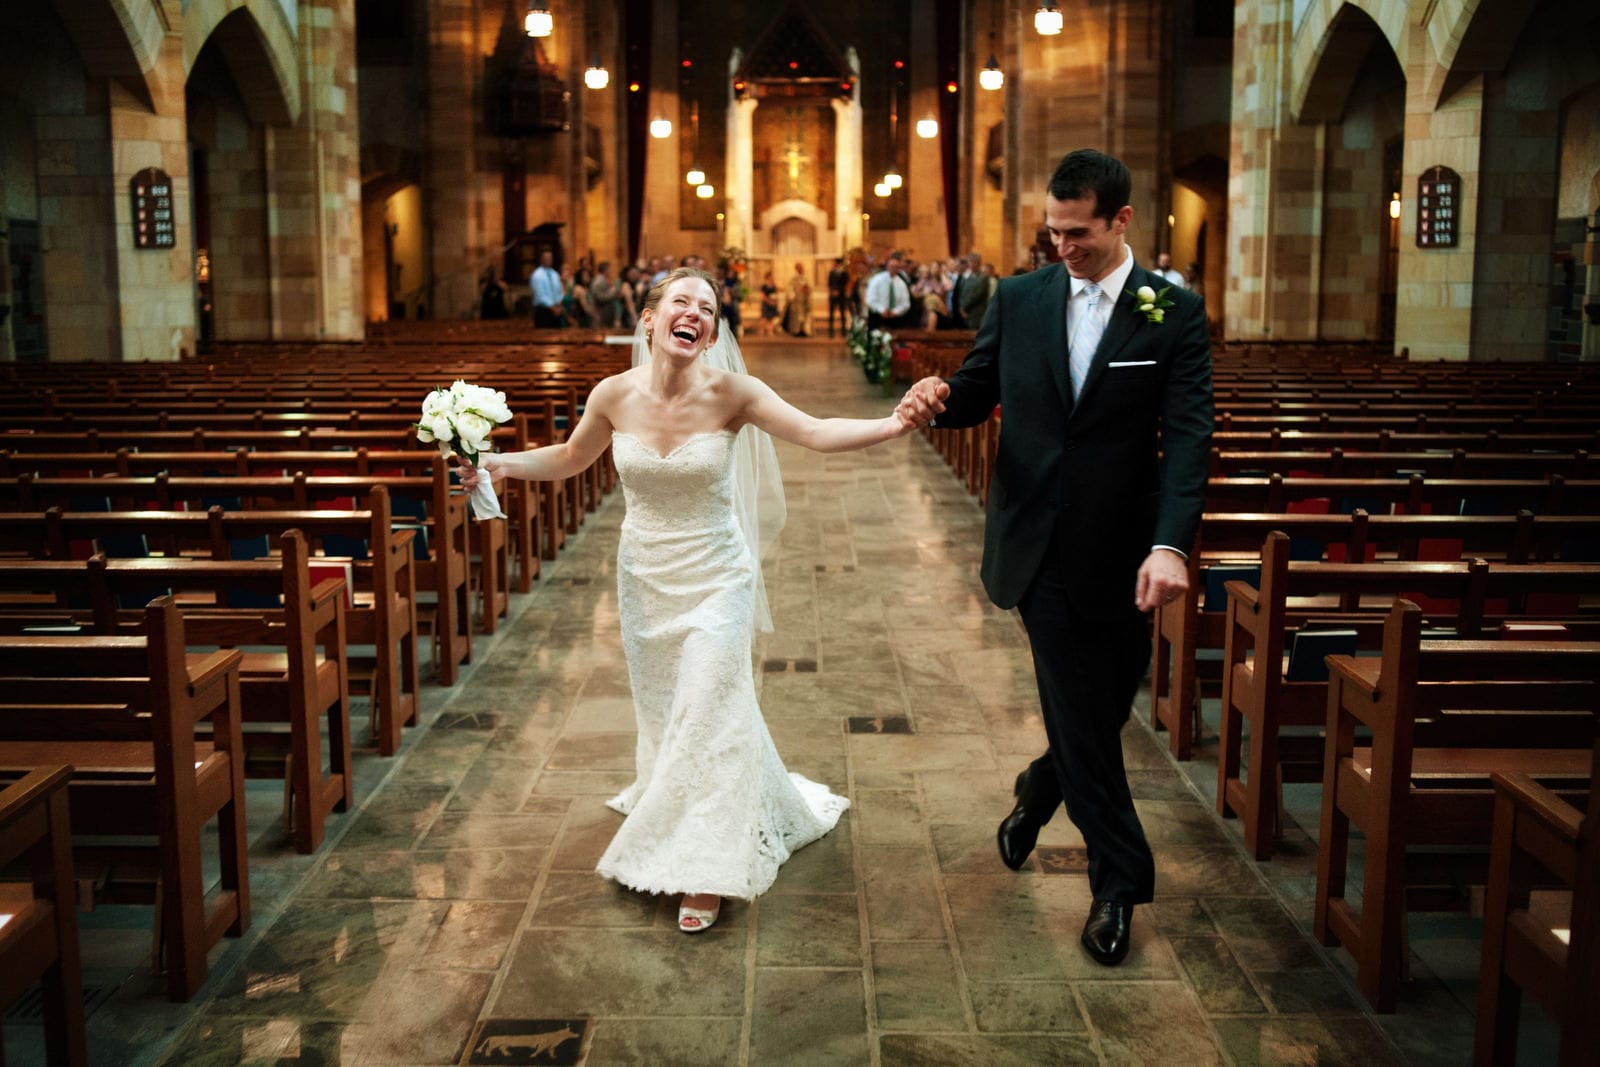 A bride holding a bouquet in one hand and her groom's hand in the other looks up and laughs as they walk down the aisle at the end of their wedding at Sacred Heart Church in Pittsburgh.